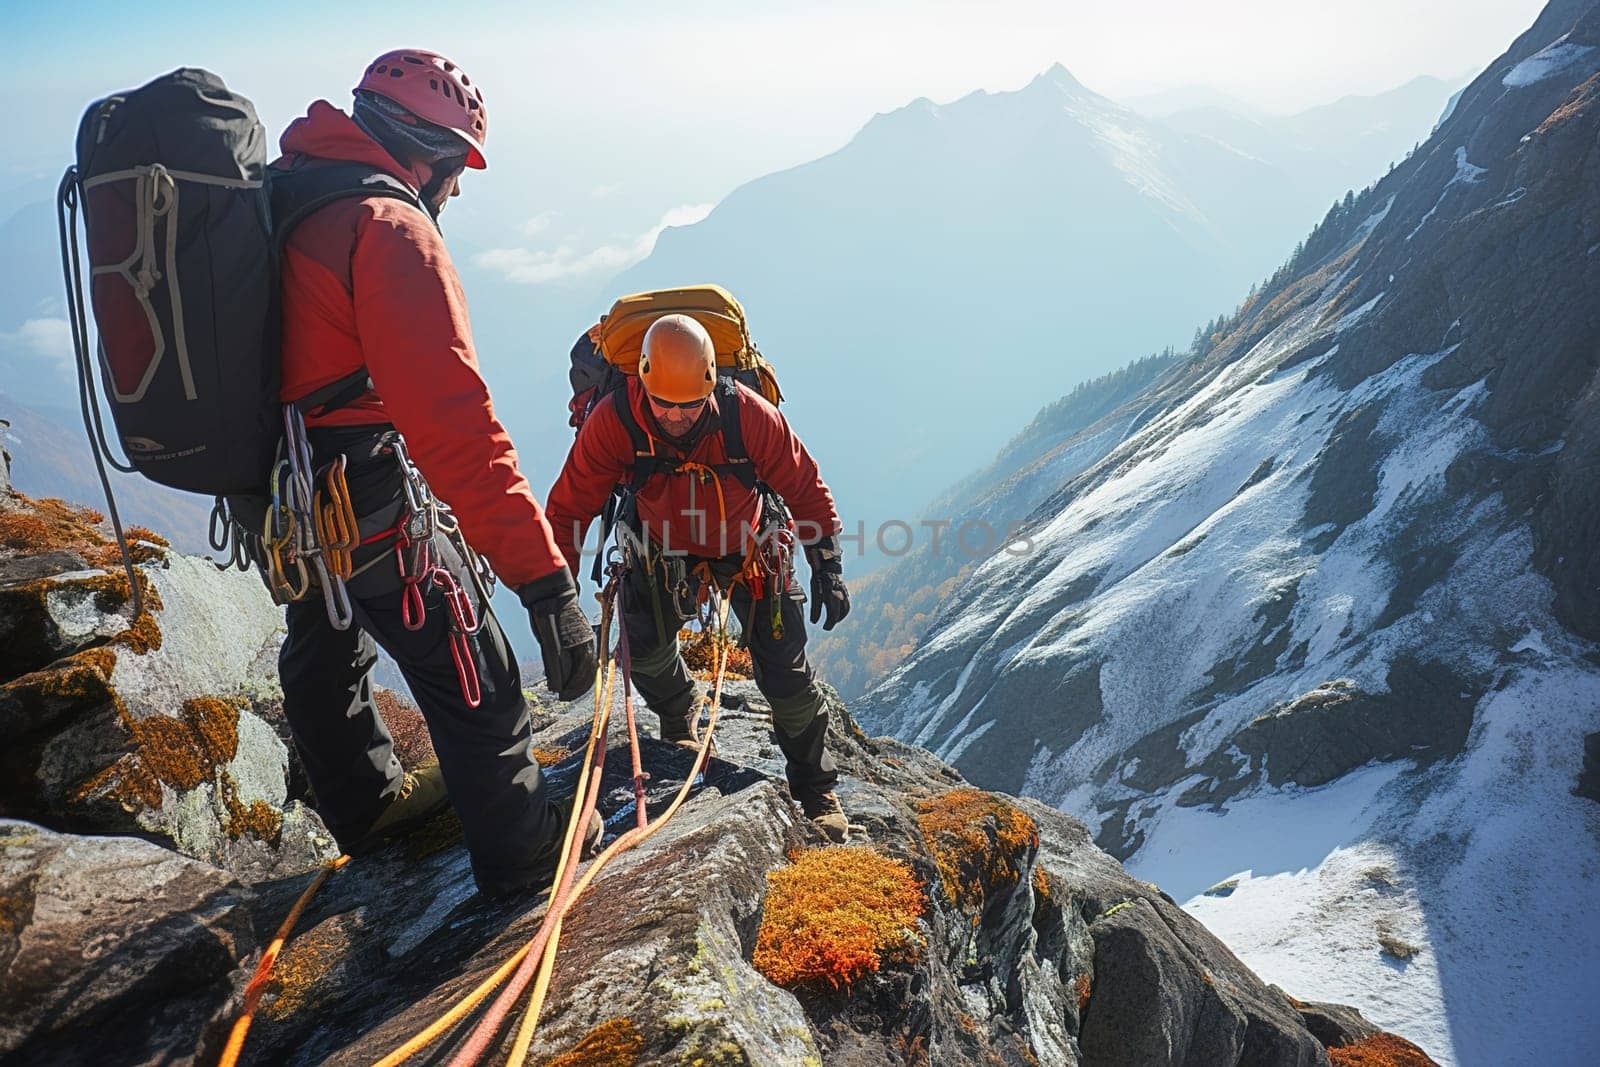 Climbers with equipment climb the mountains. by Yurich32